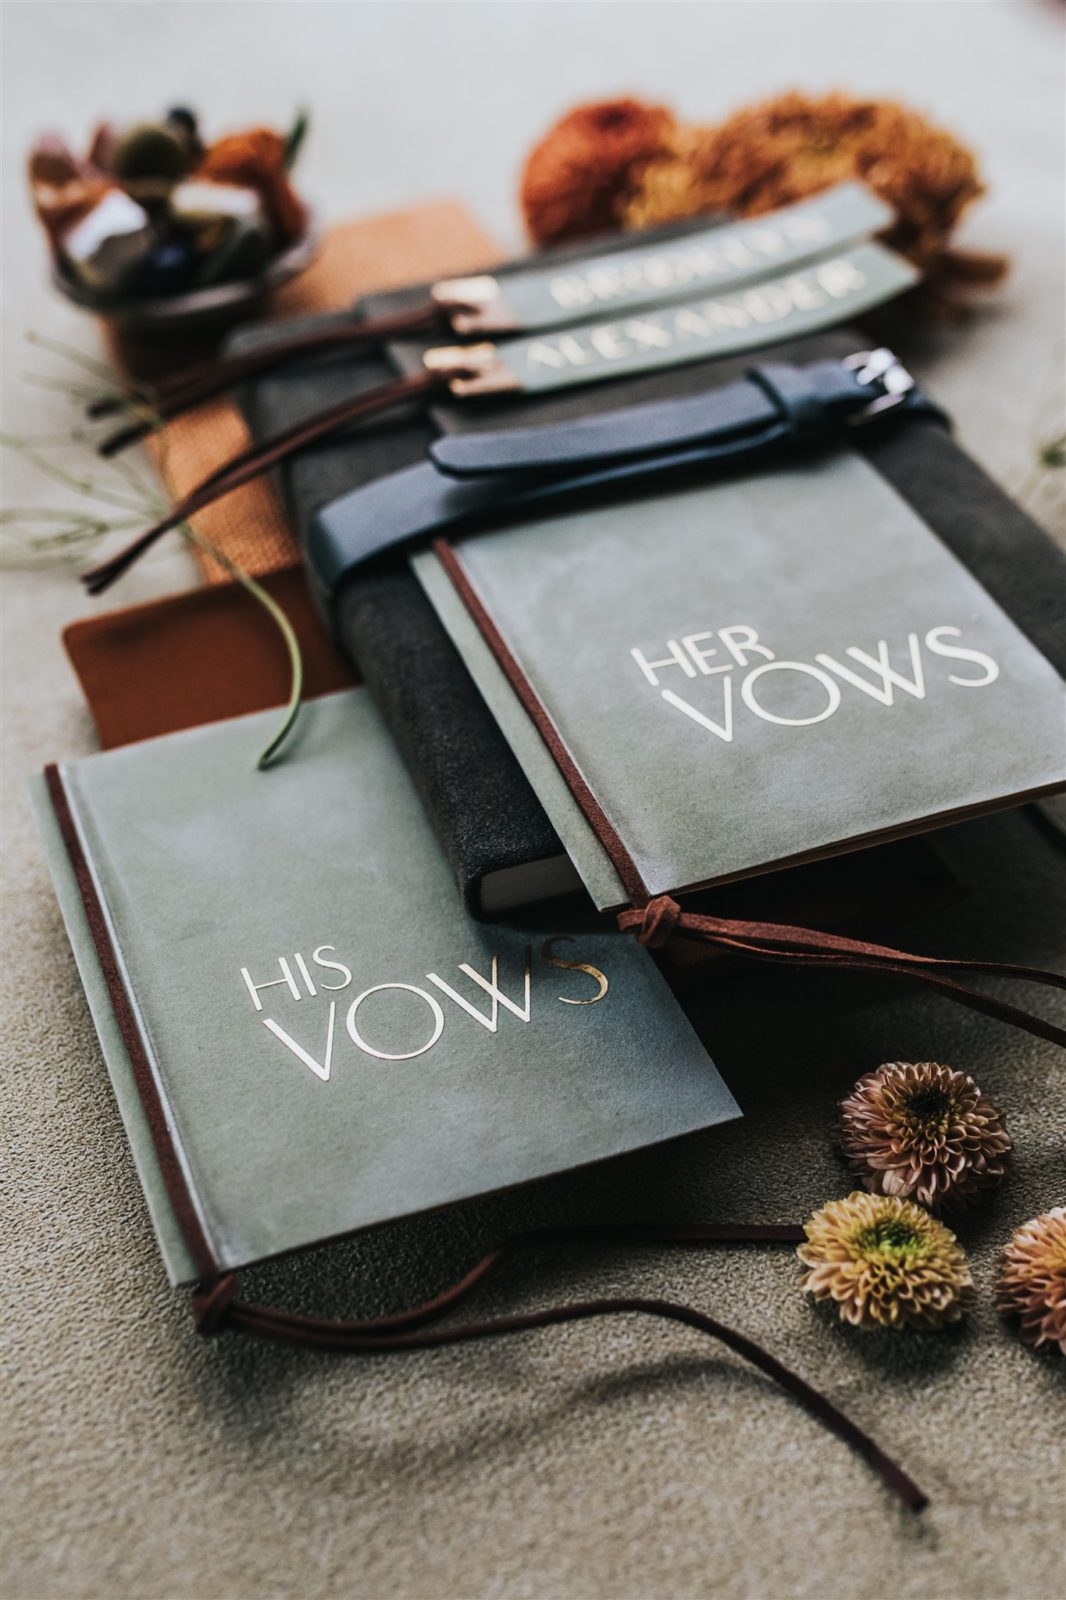 Textured his and her vow booklets for a moody fall wedding